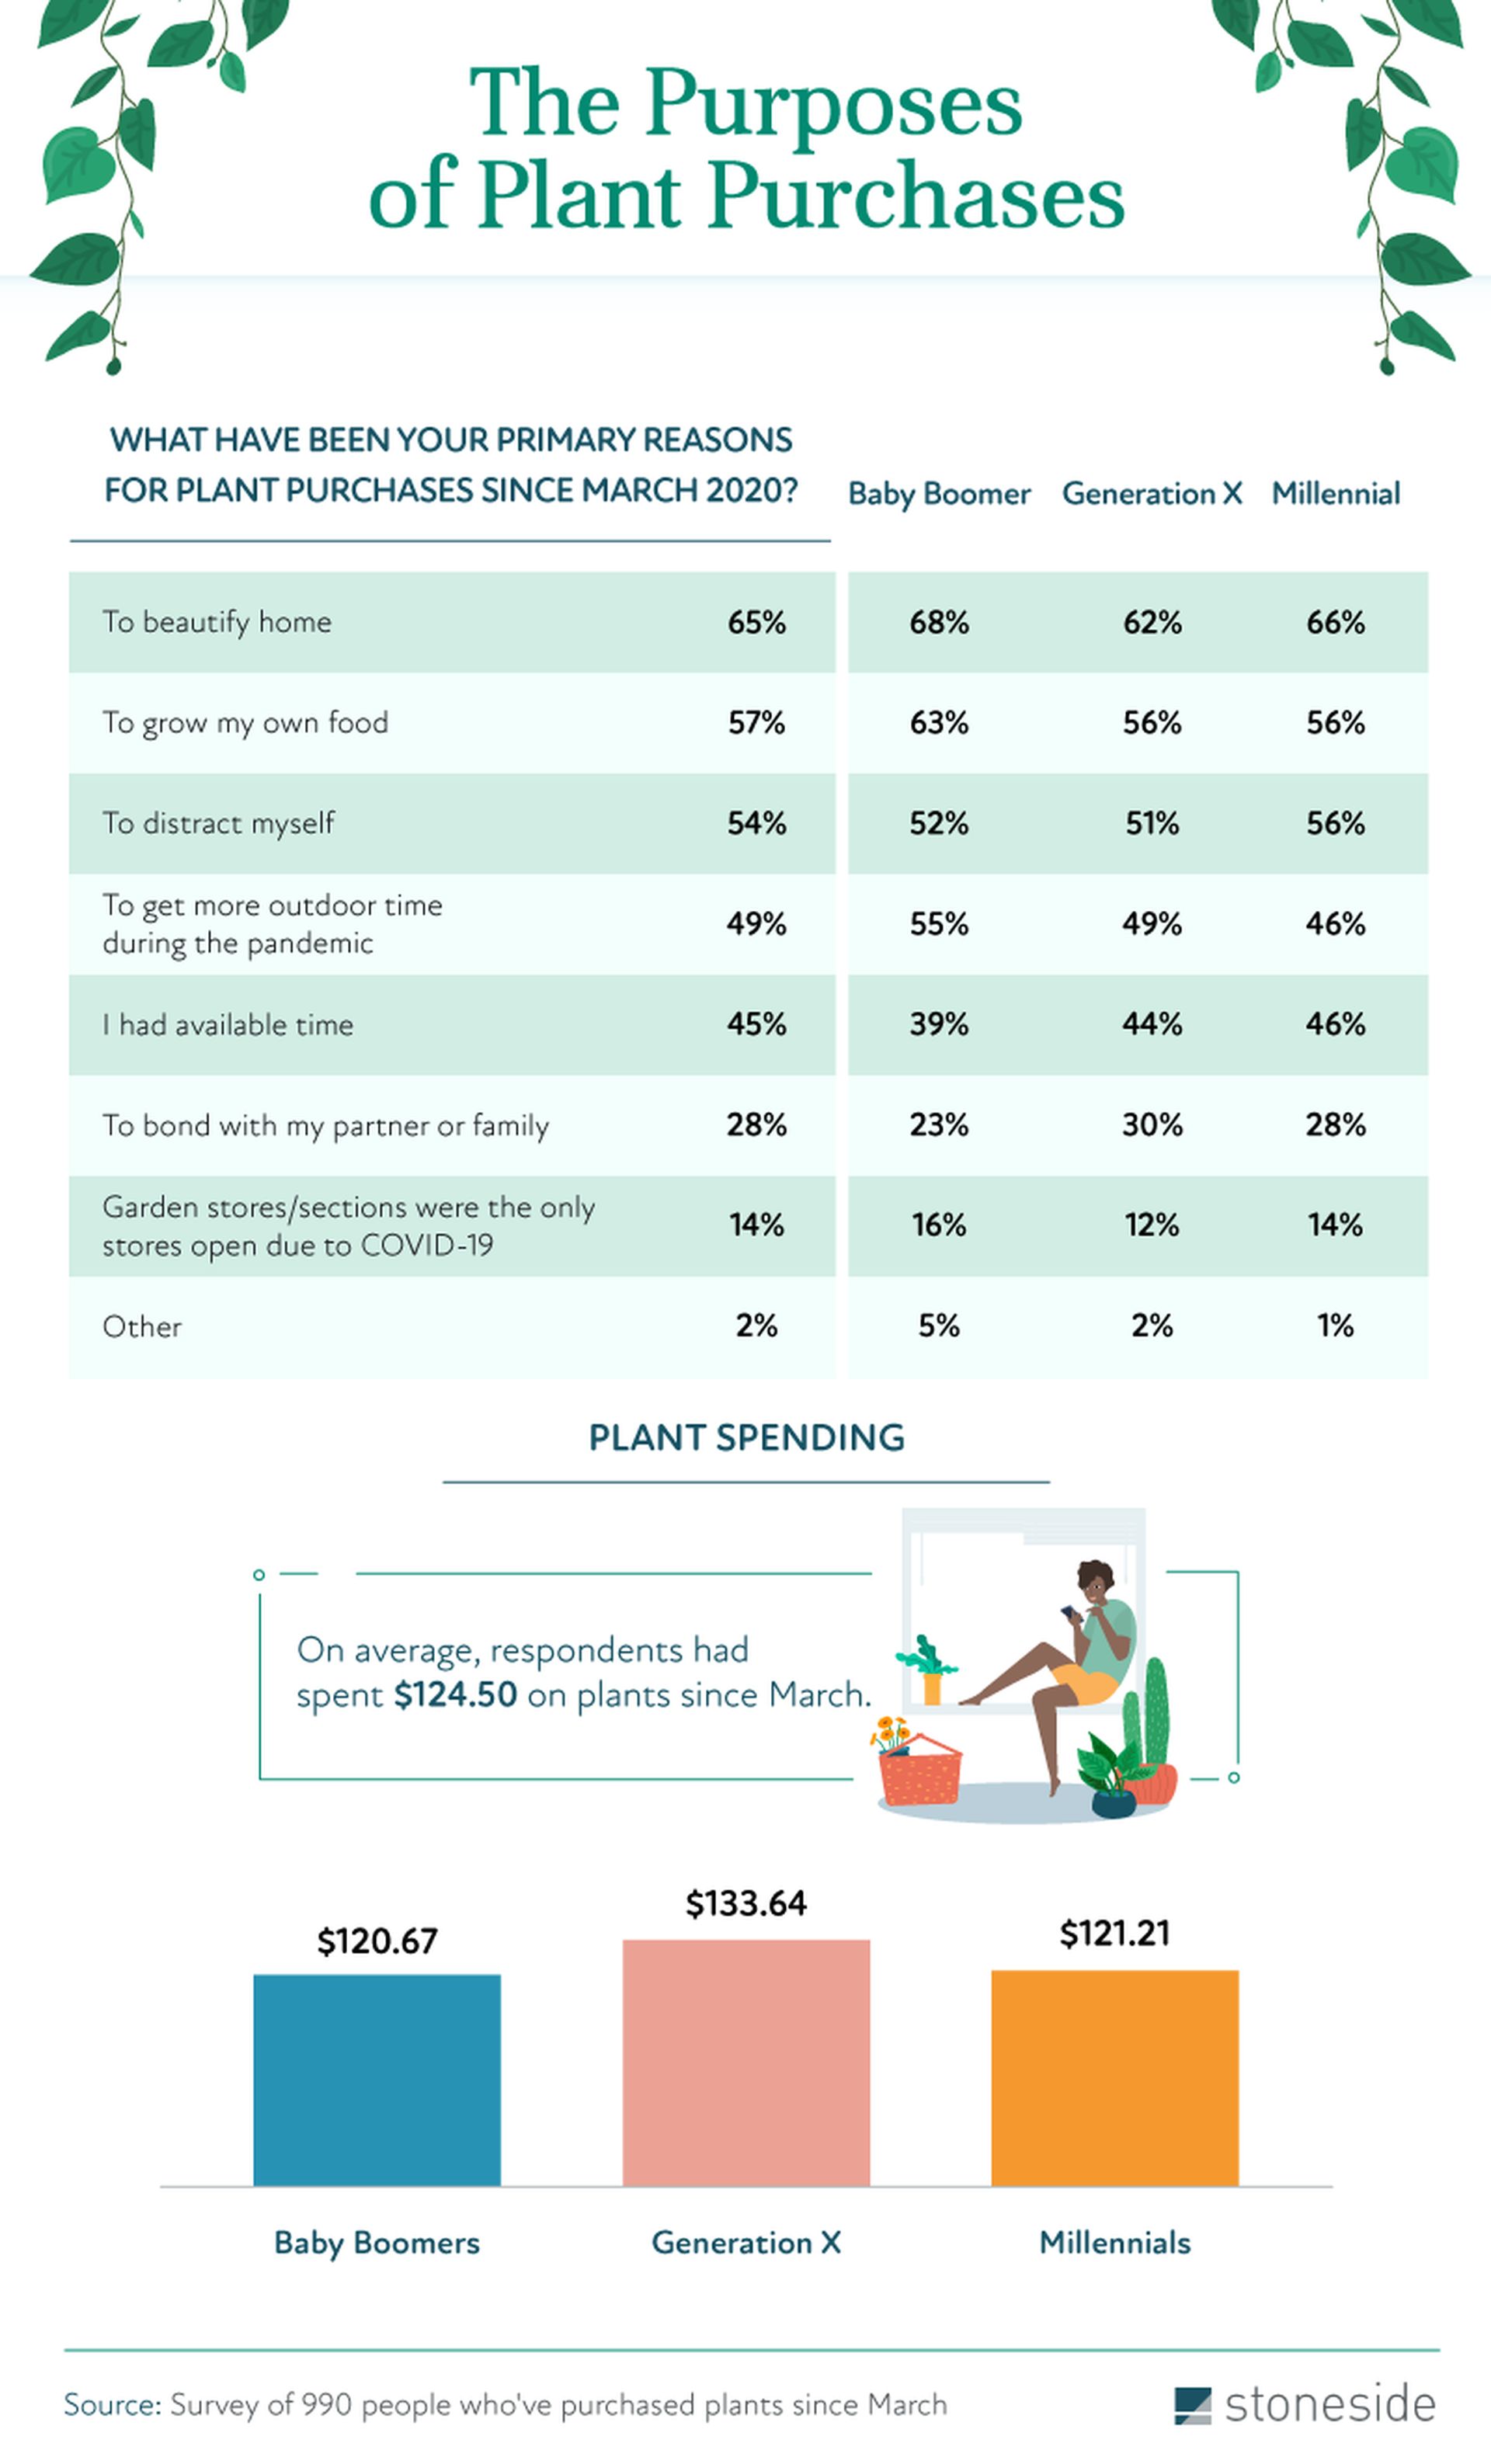 Primary Reasons for Plant Purchases Since March 2020